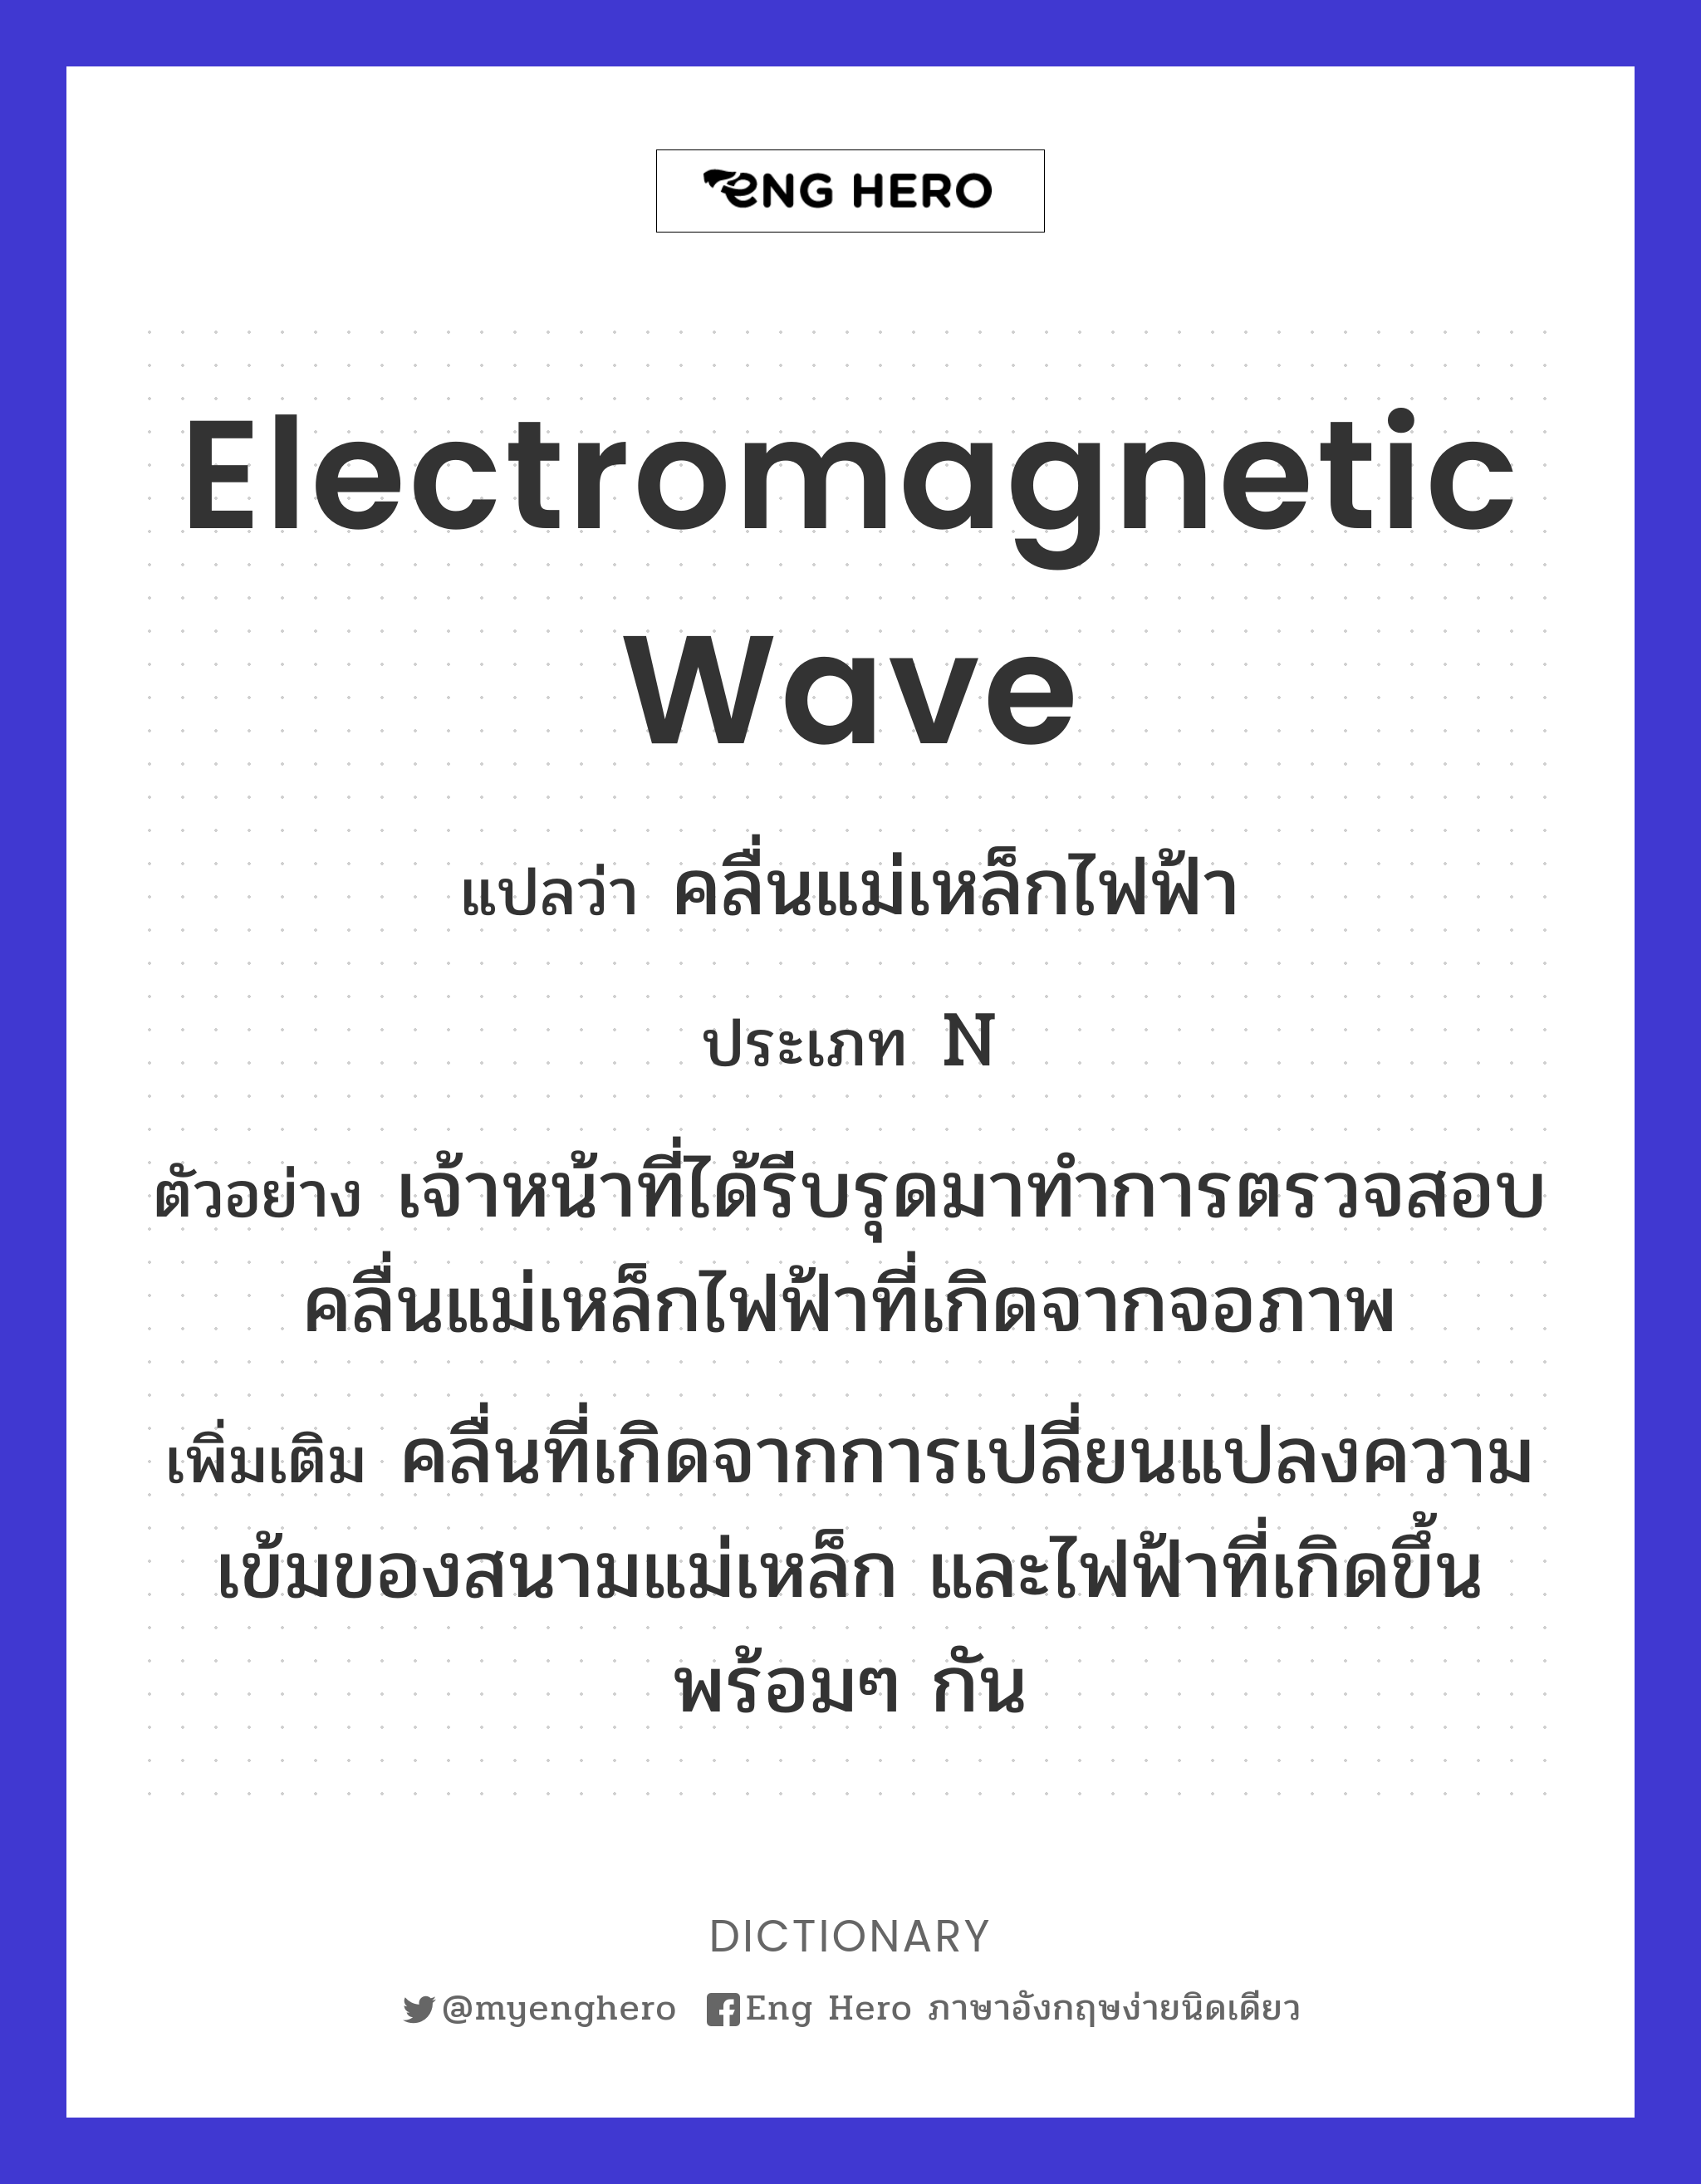 electromagnetic wave